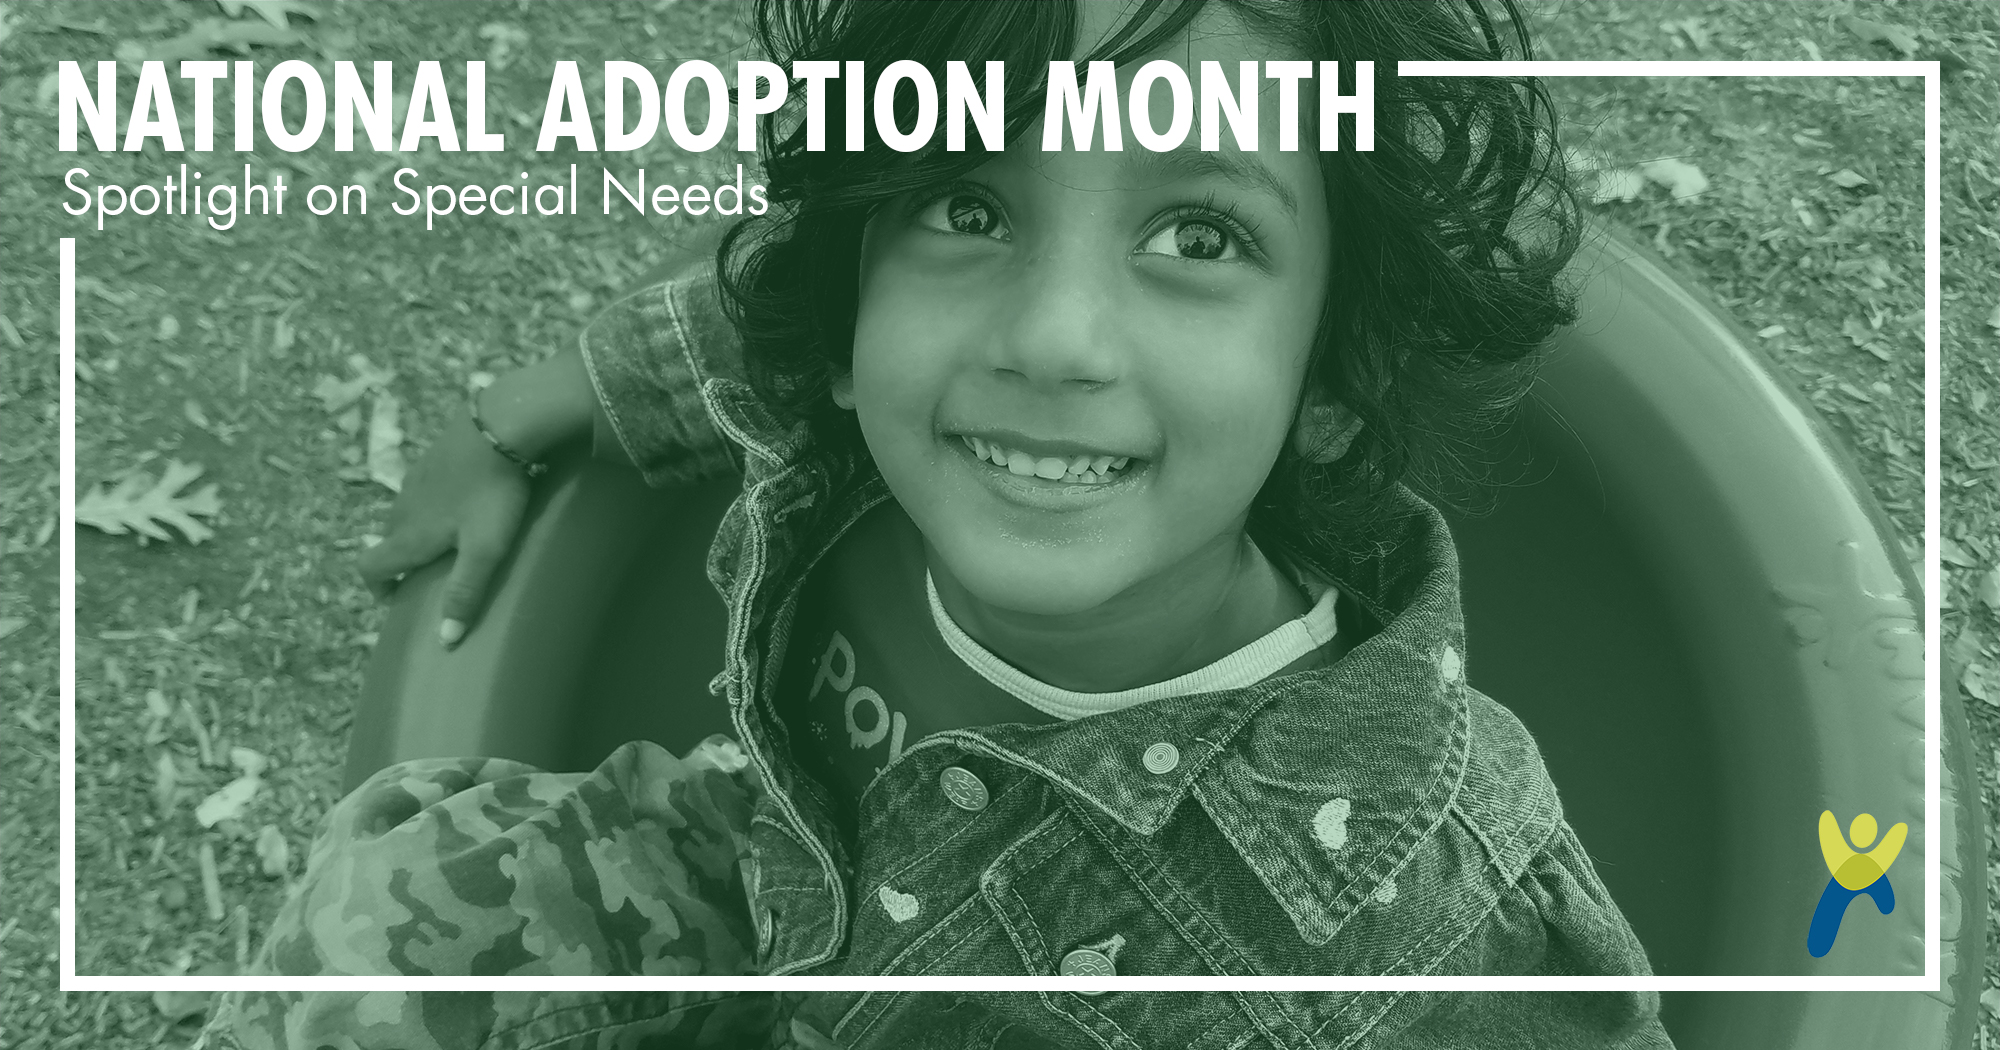 Photo of Devki Horine, a child with cerebral palsy, for national adoption month and the spotlight on special needs.